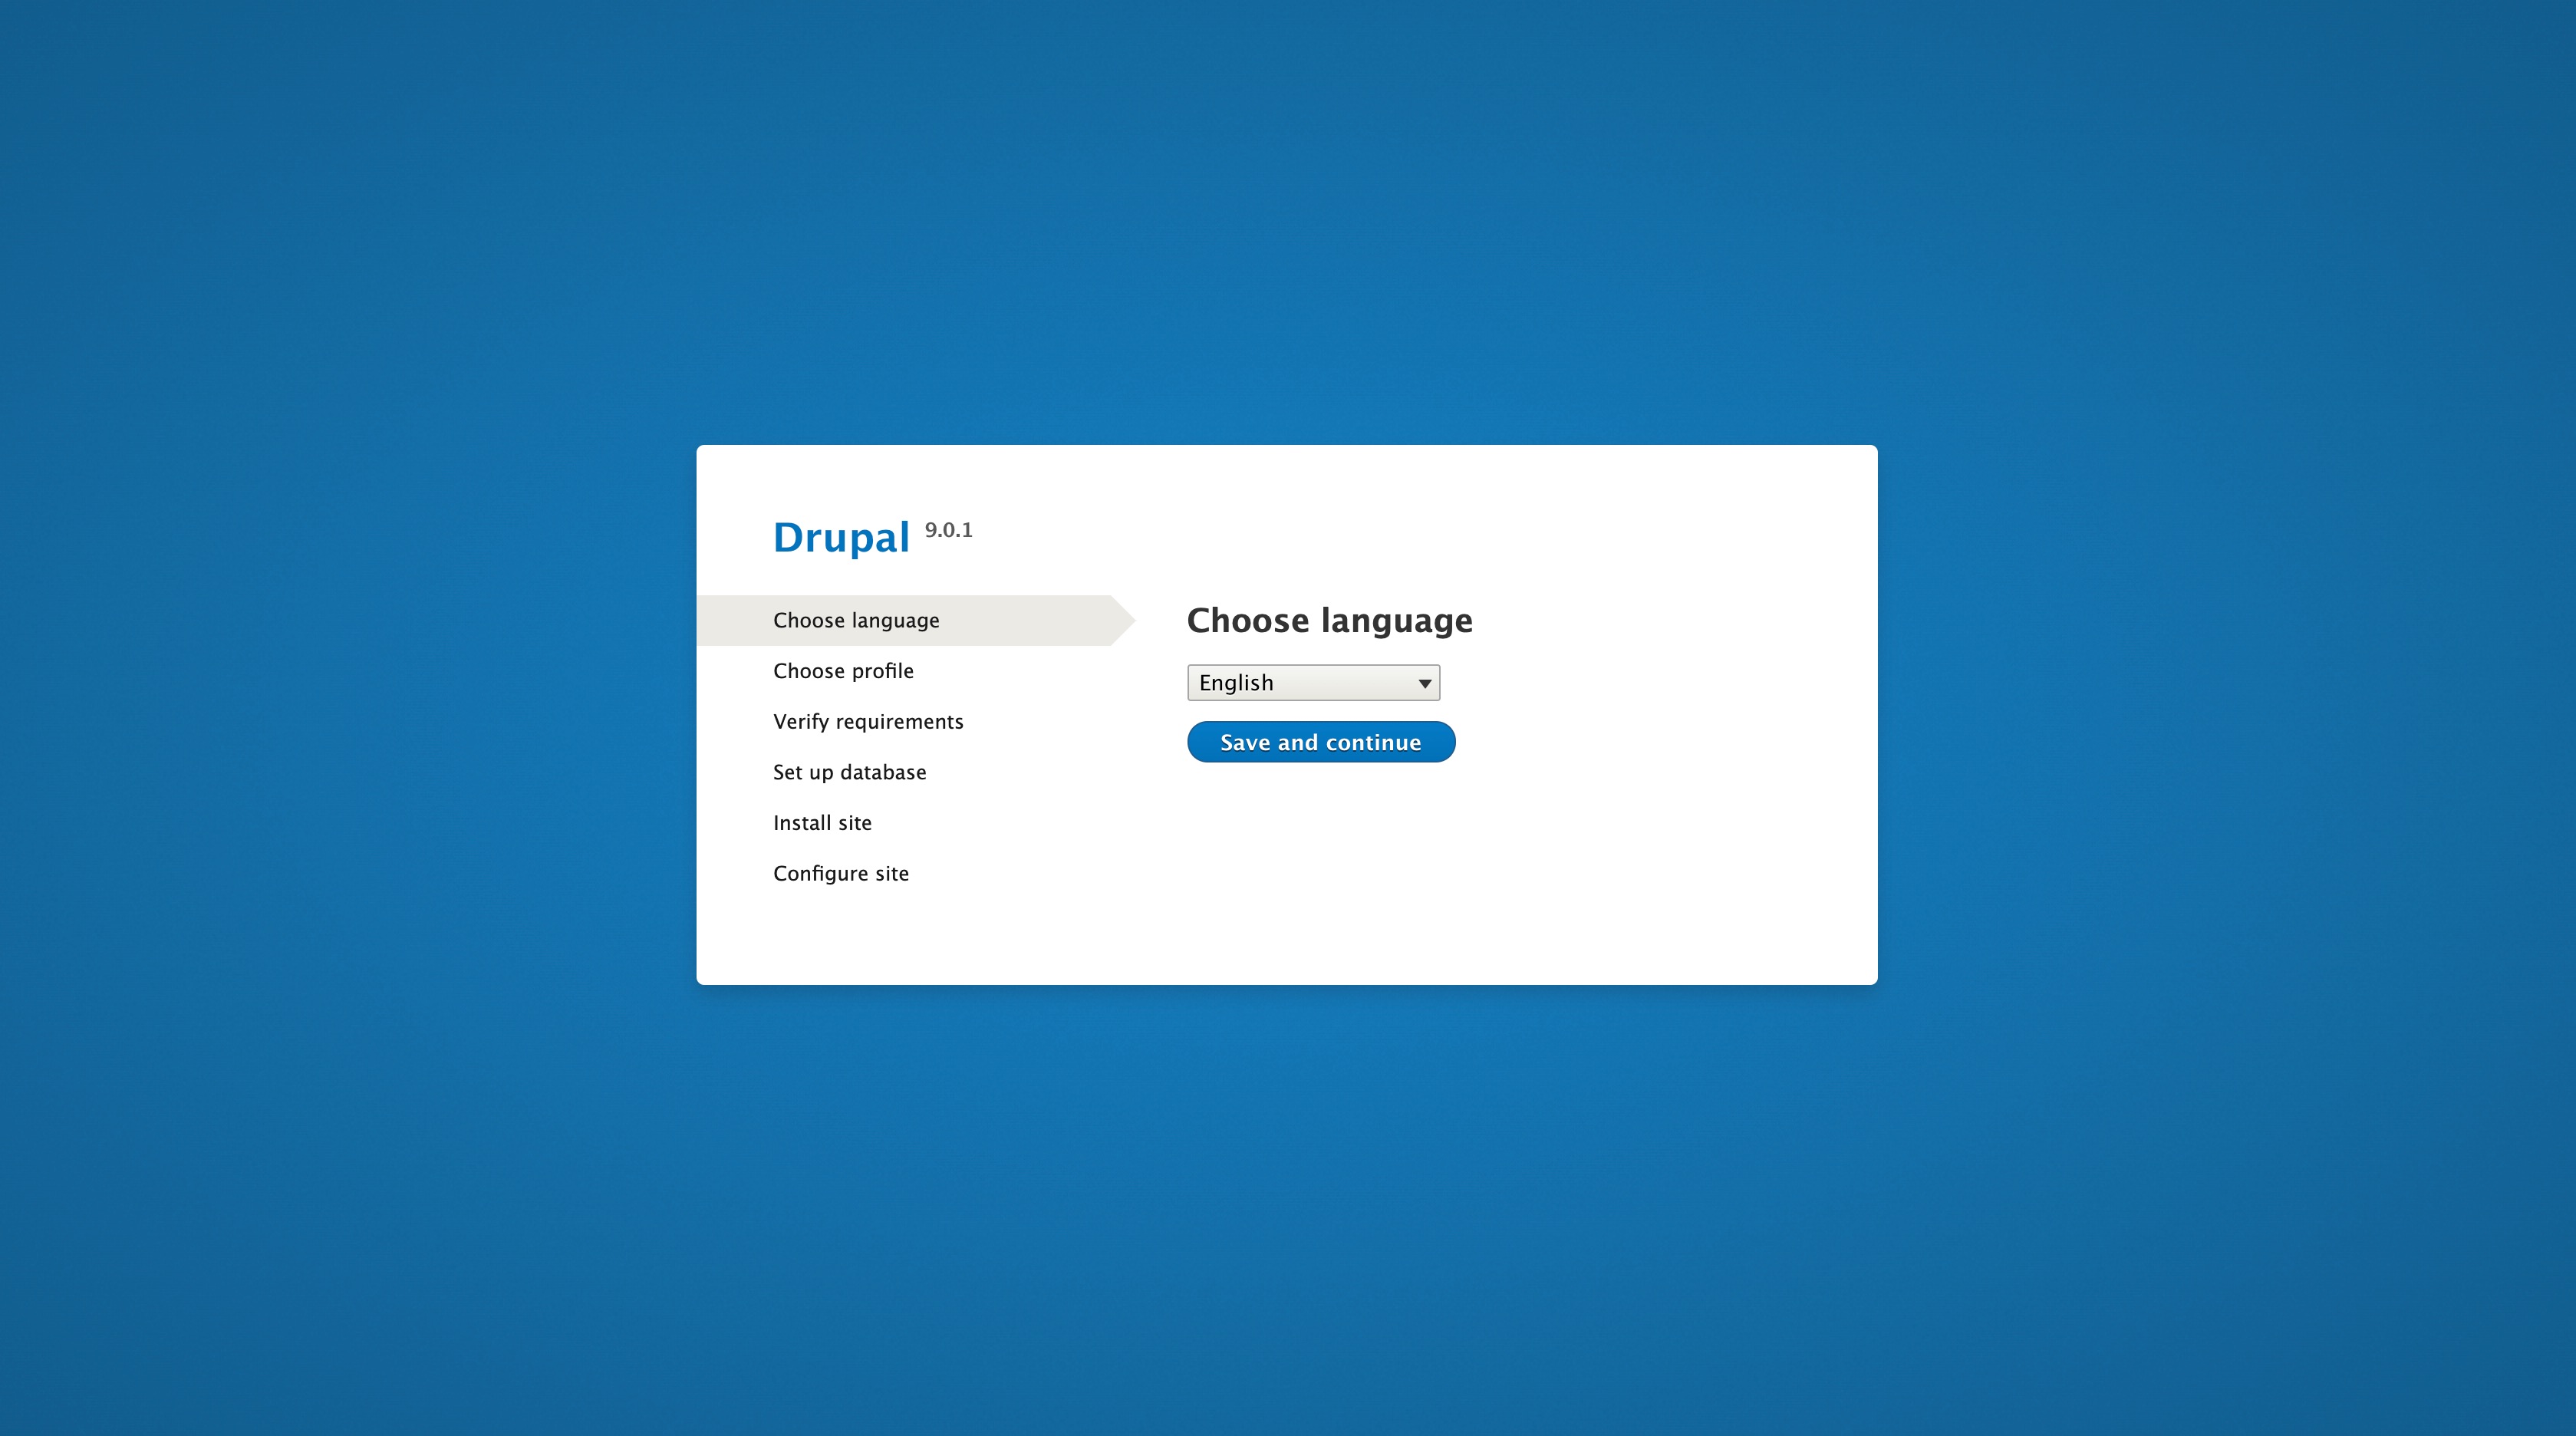 View the Drupal installation page.